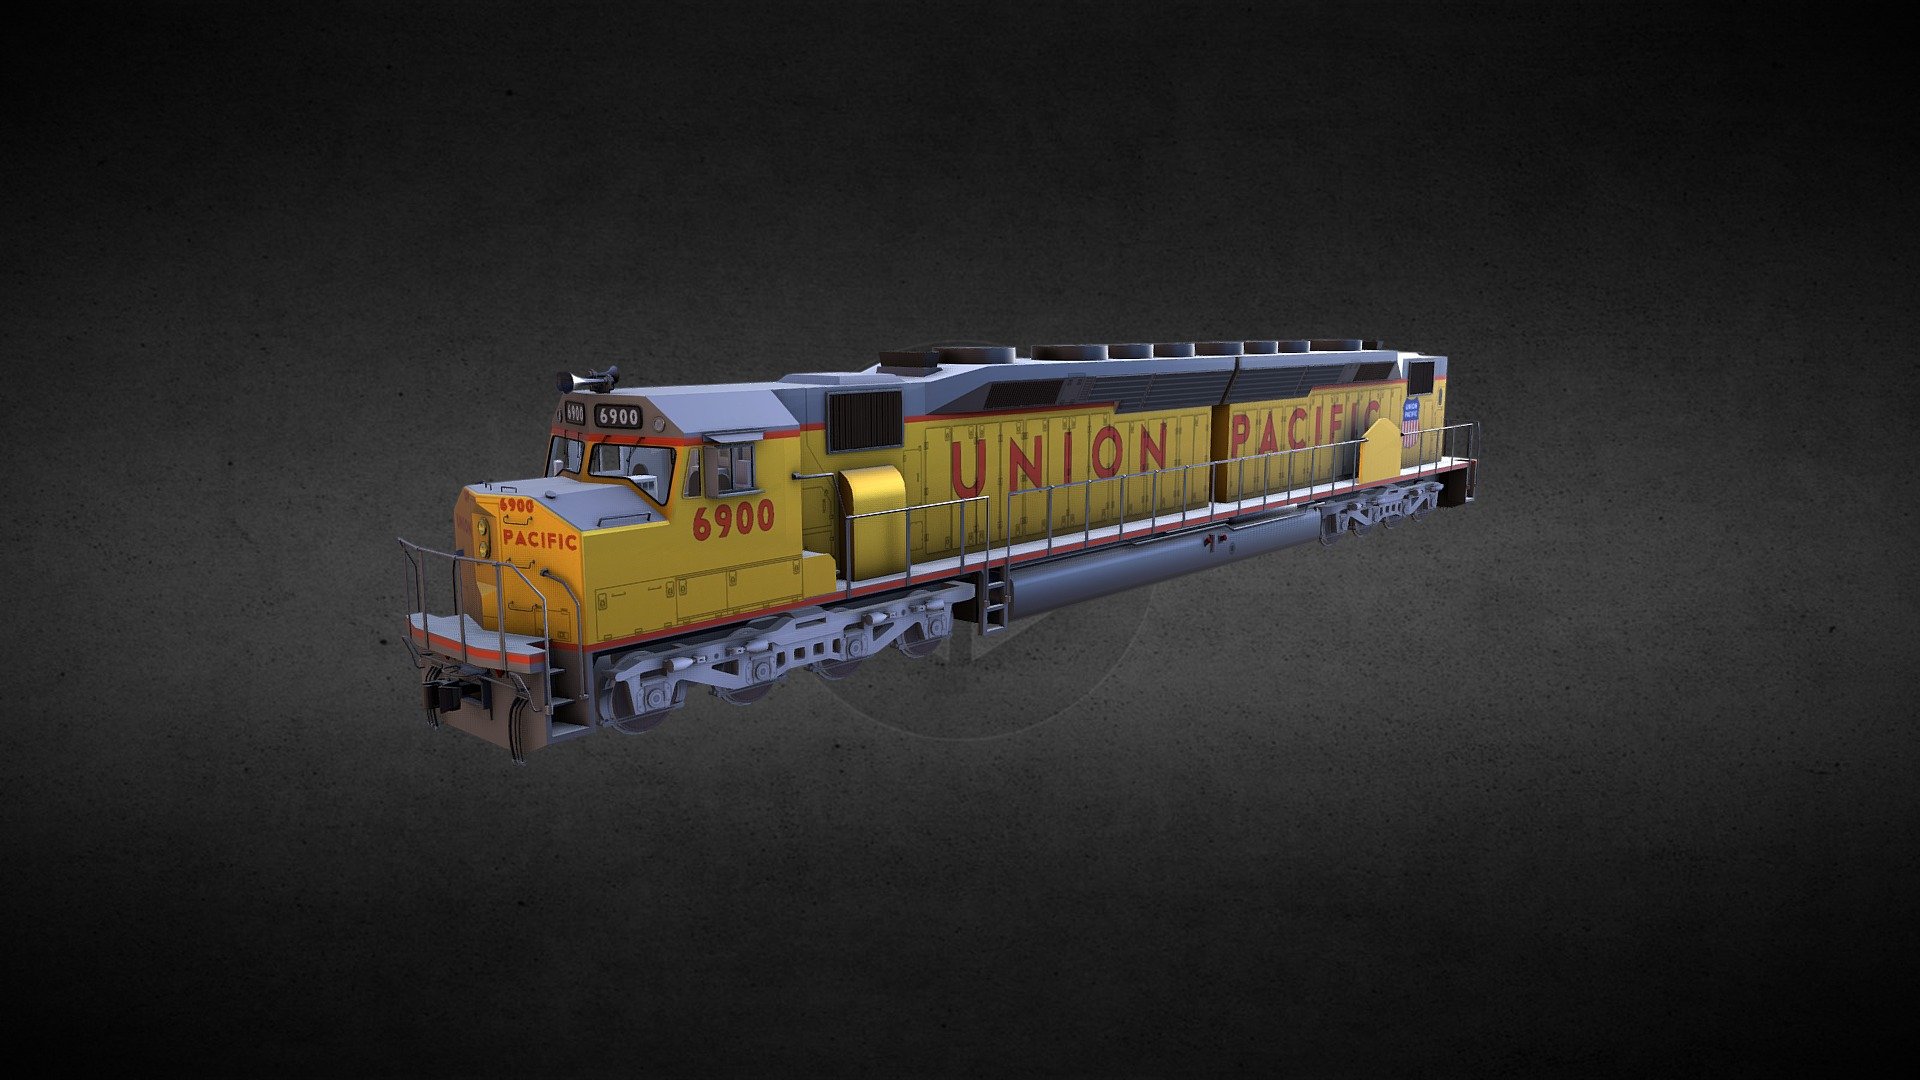 The DDA40X is a 6,600 horsepower (4.92 megawatts) D-D diesel-electric built by the General Motors EMD division of La Grange, Illinois for the Union Pacific Railroad. Nicknamed &ldquo;Centennials